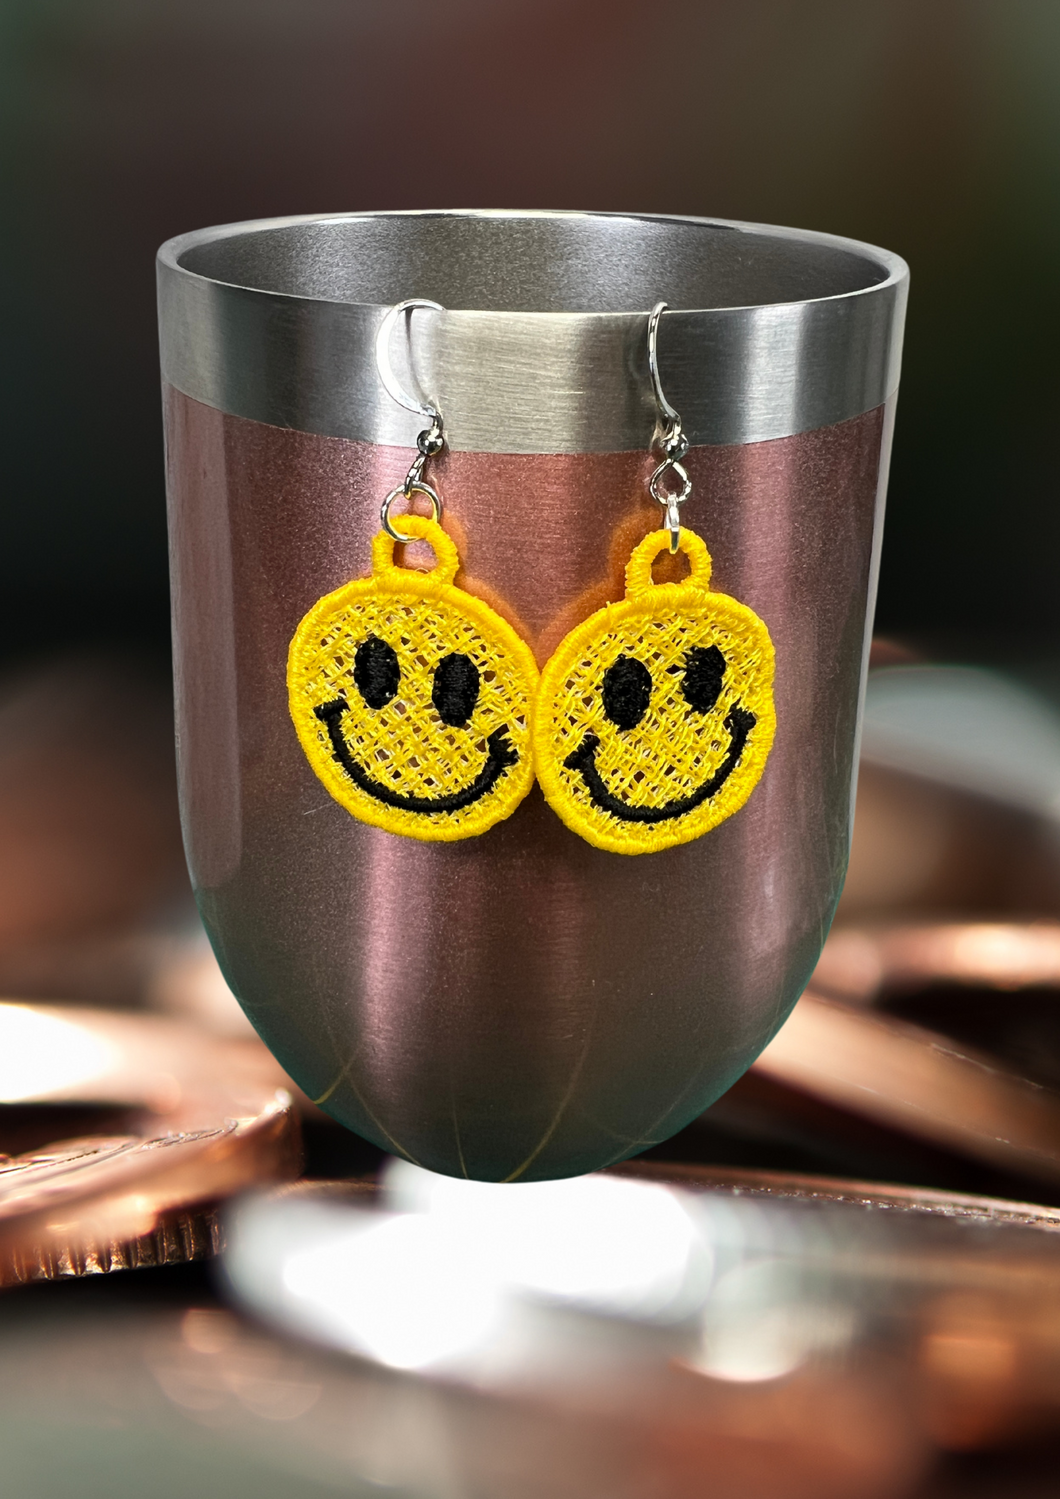 Earrings - Embroidered Smiley Face